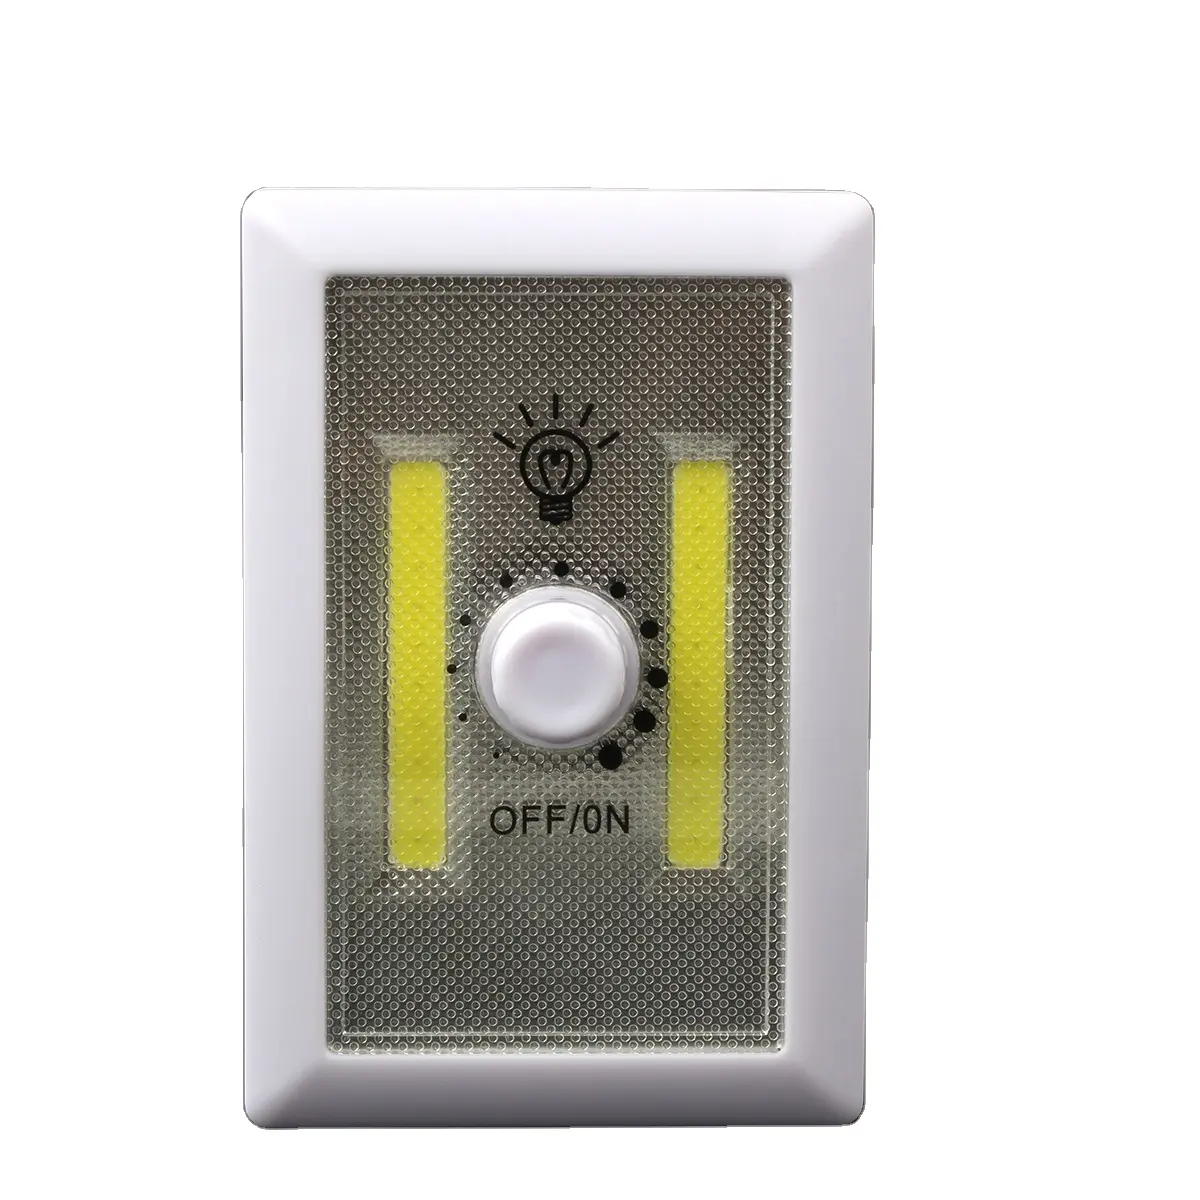 Mini Cob Lamp Battery Operated Led Wall Night Indoor l Electrical Wall Way Push Button Switch Light Emergency Light for Home